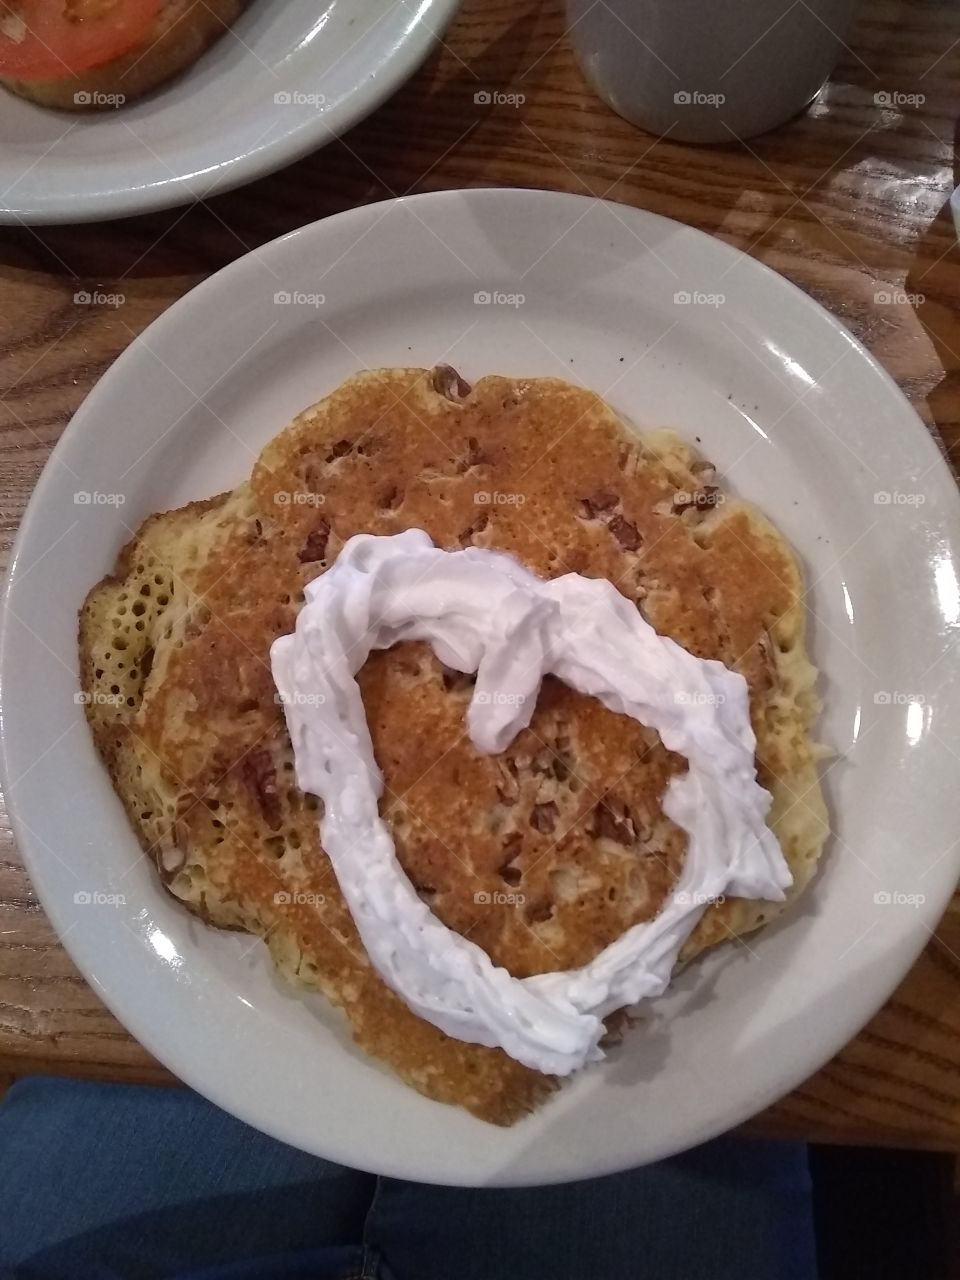 Pecan pancakes are great but they're better with a failed whipped cream heart